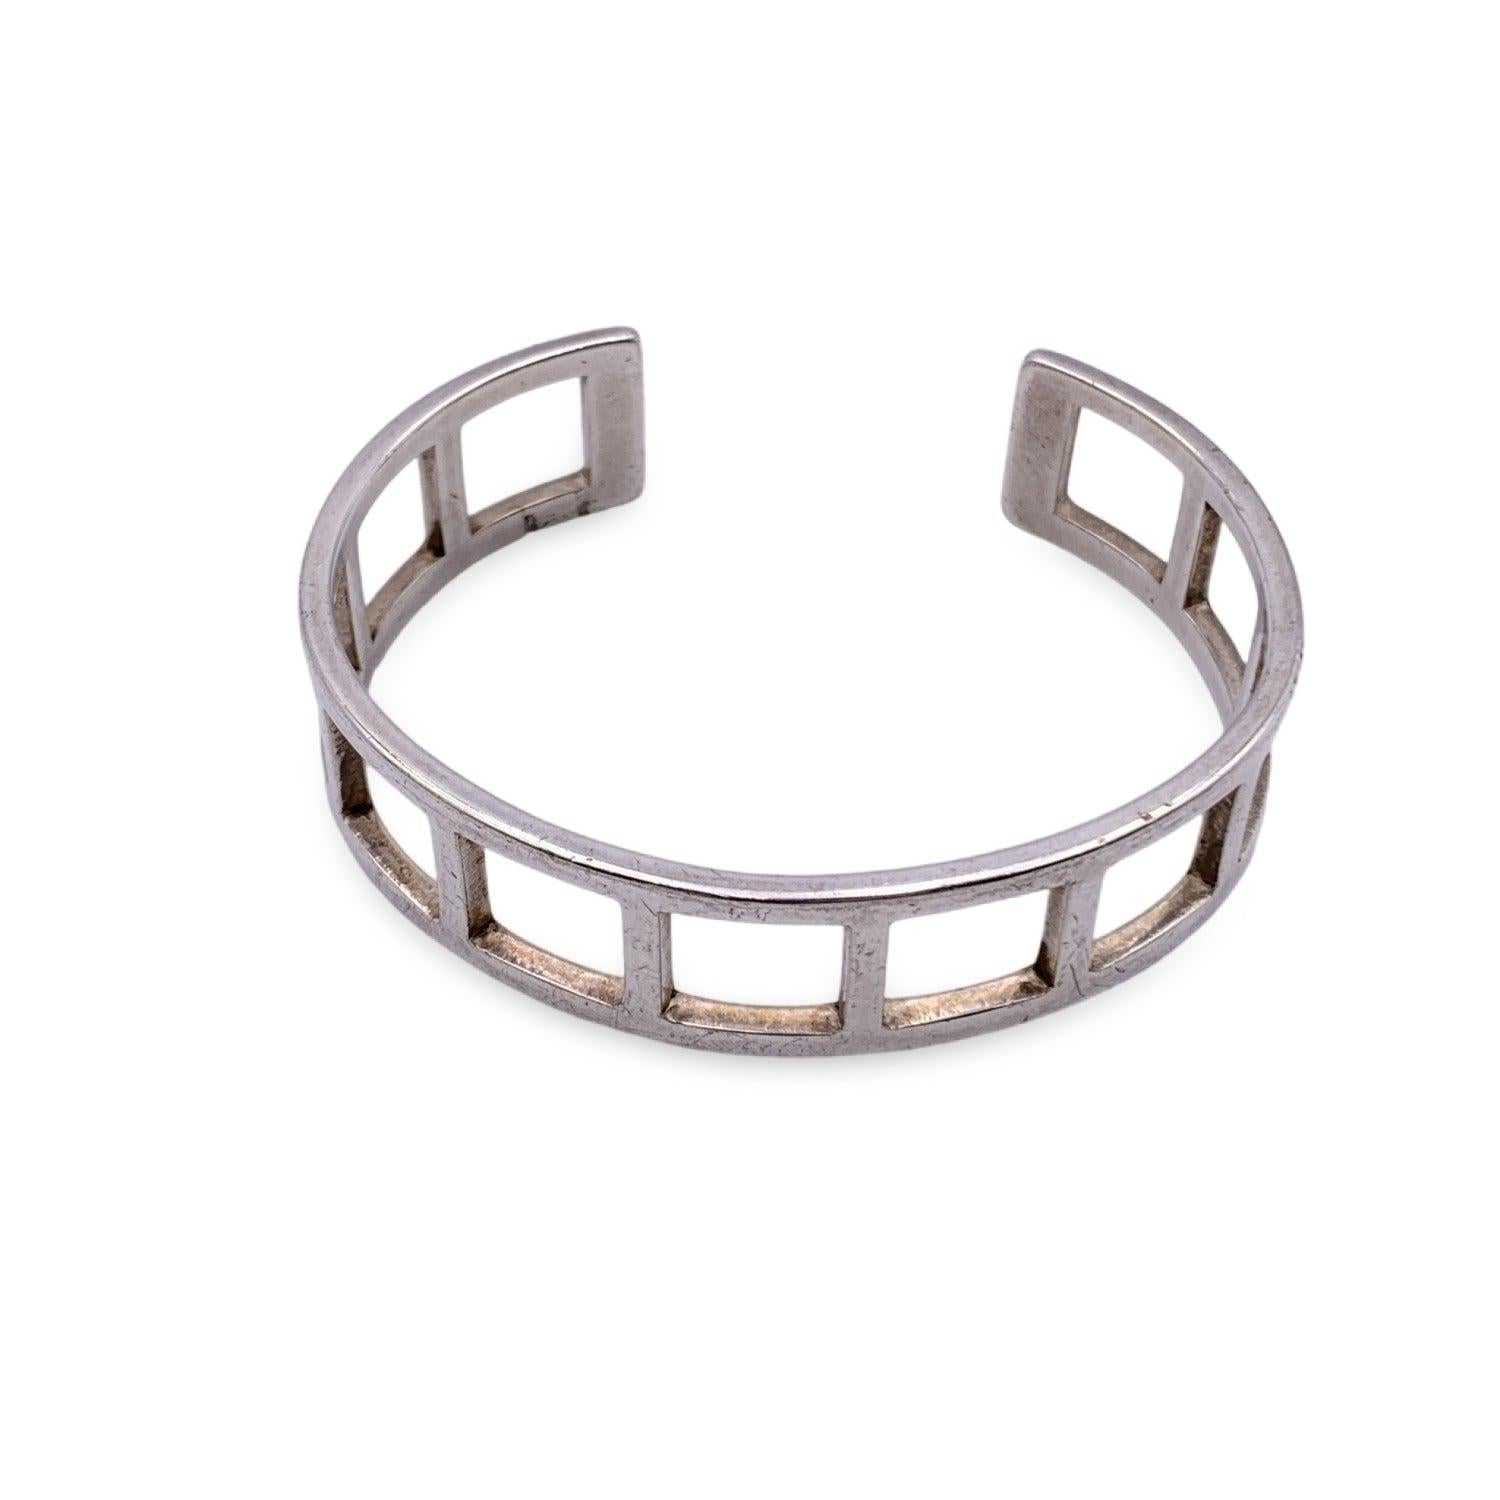 Vintage bangle bracelet by Gucci. Made in sterling silver. 'Gucci - Made in Italy' and '925' hallmark engraved on the bracelet. Internal circumference: 6.5 inches - 16.5 cm Condition A - EXCELLENT Gently used. Very light superficial scratches and